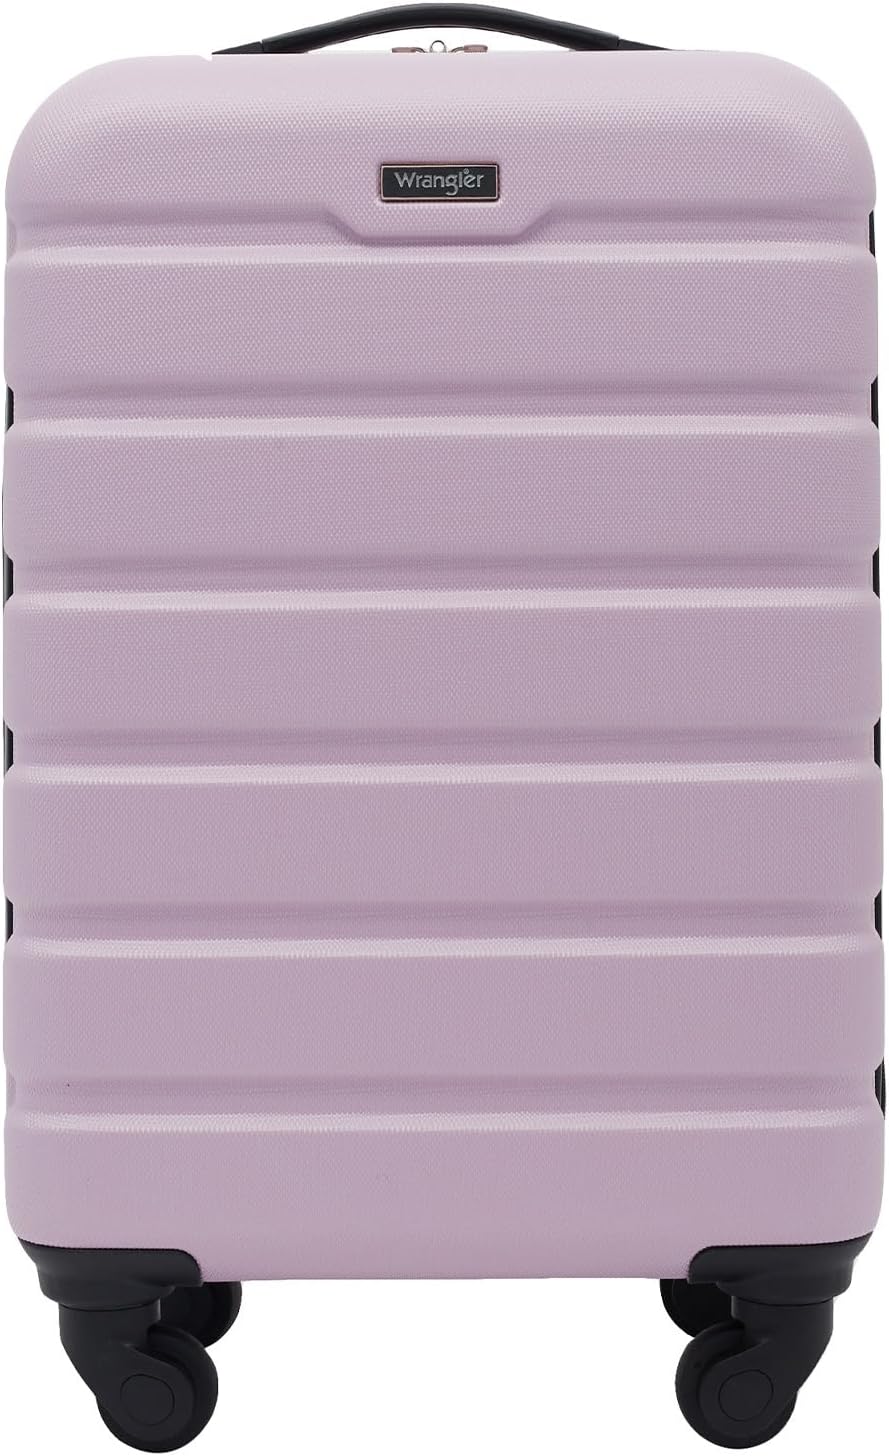 Wrangler 20" Spinner Carry-On Luggage, Lilac 